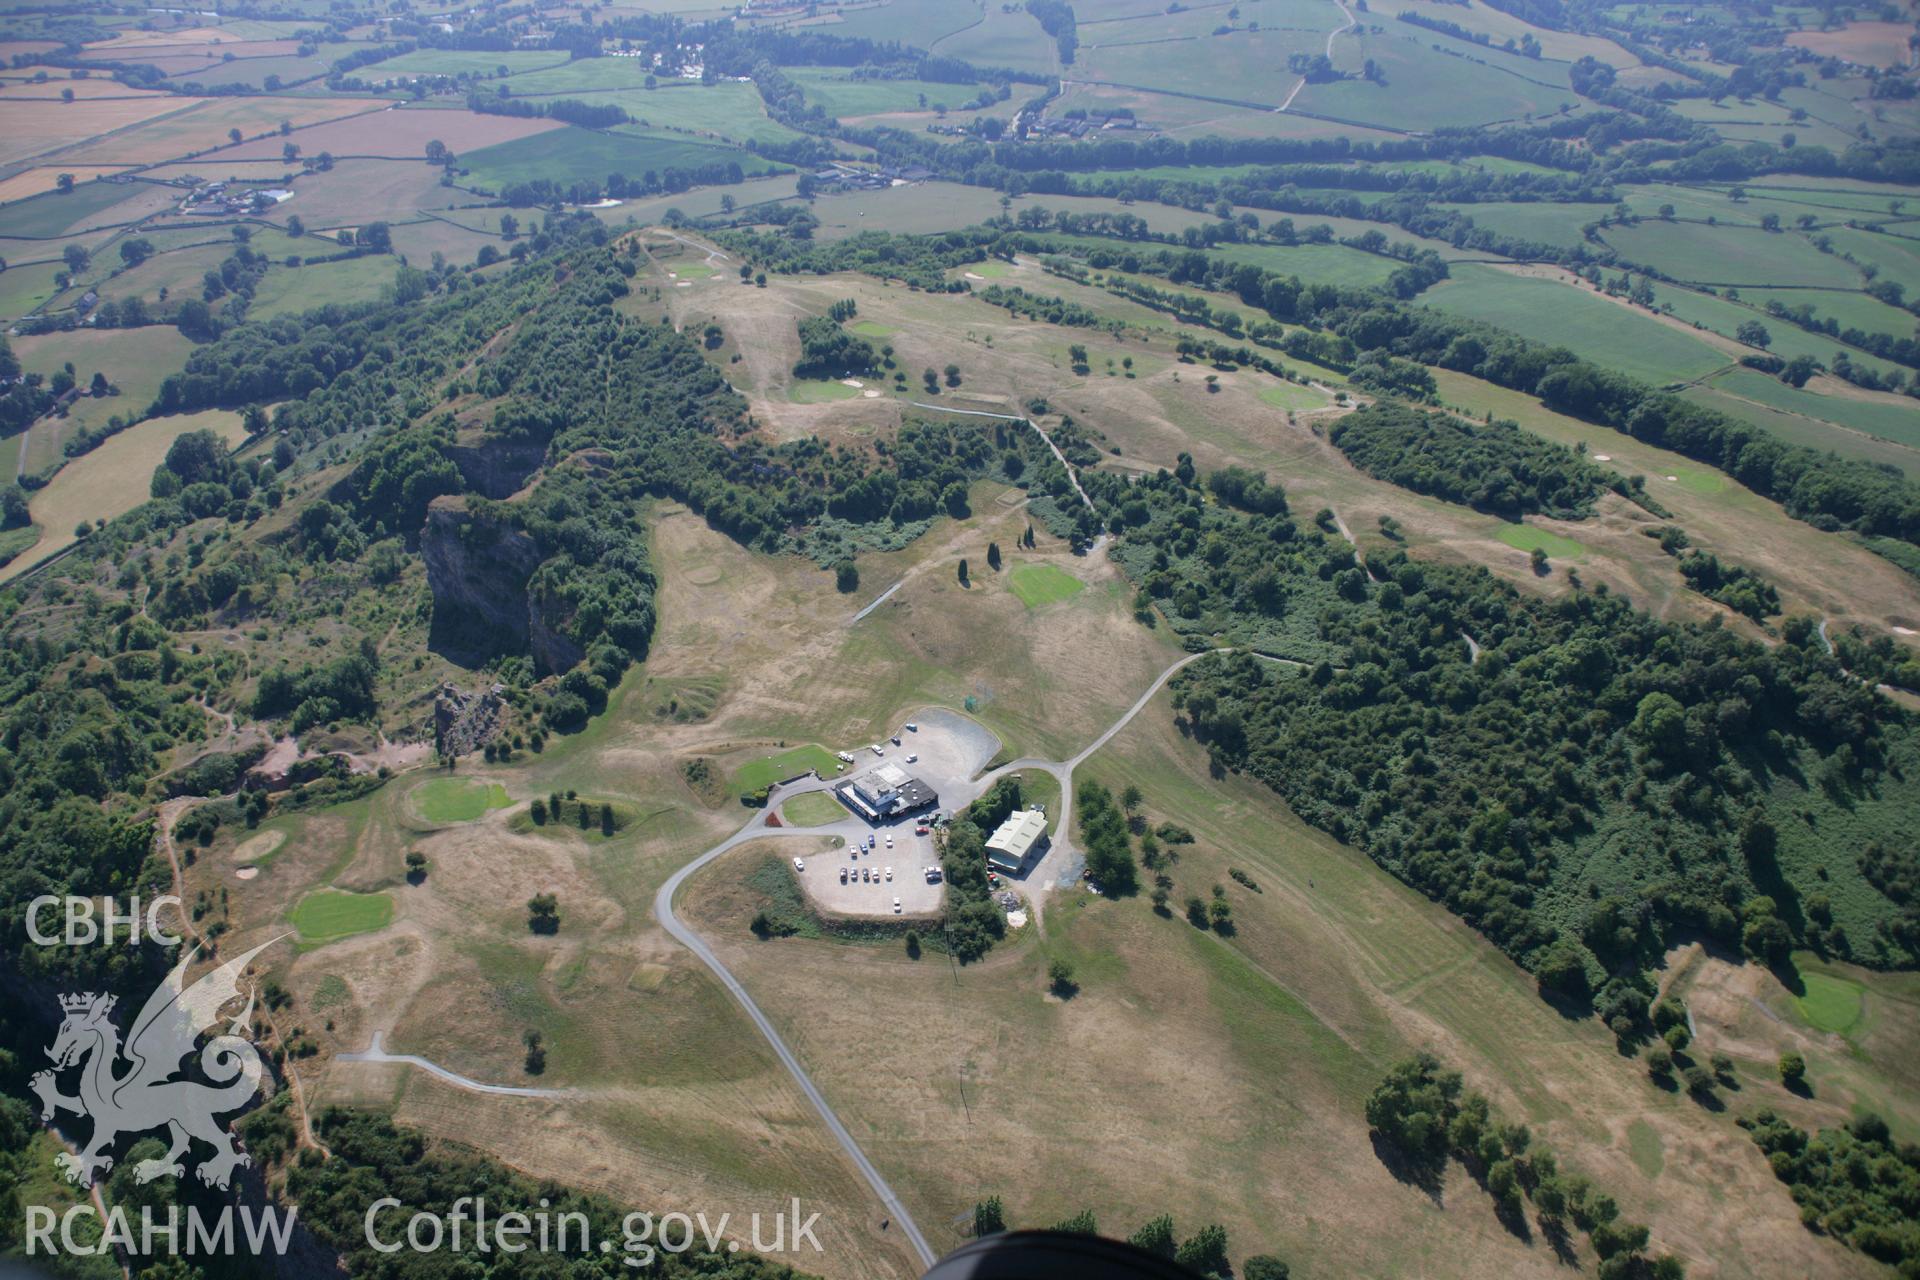 RCAHMW colour oblique aerial photograph of Llanymynech Hillfort. Taken on 17 July 2006 by Toby Driver.